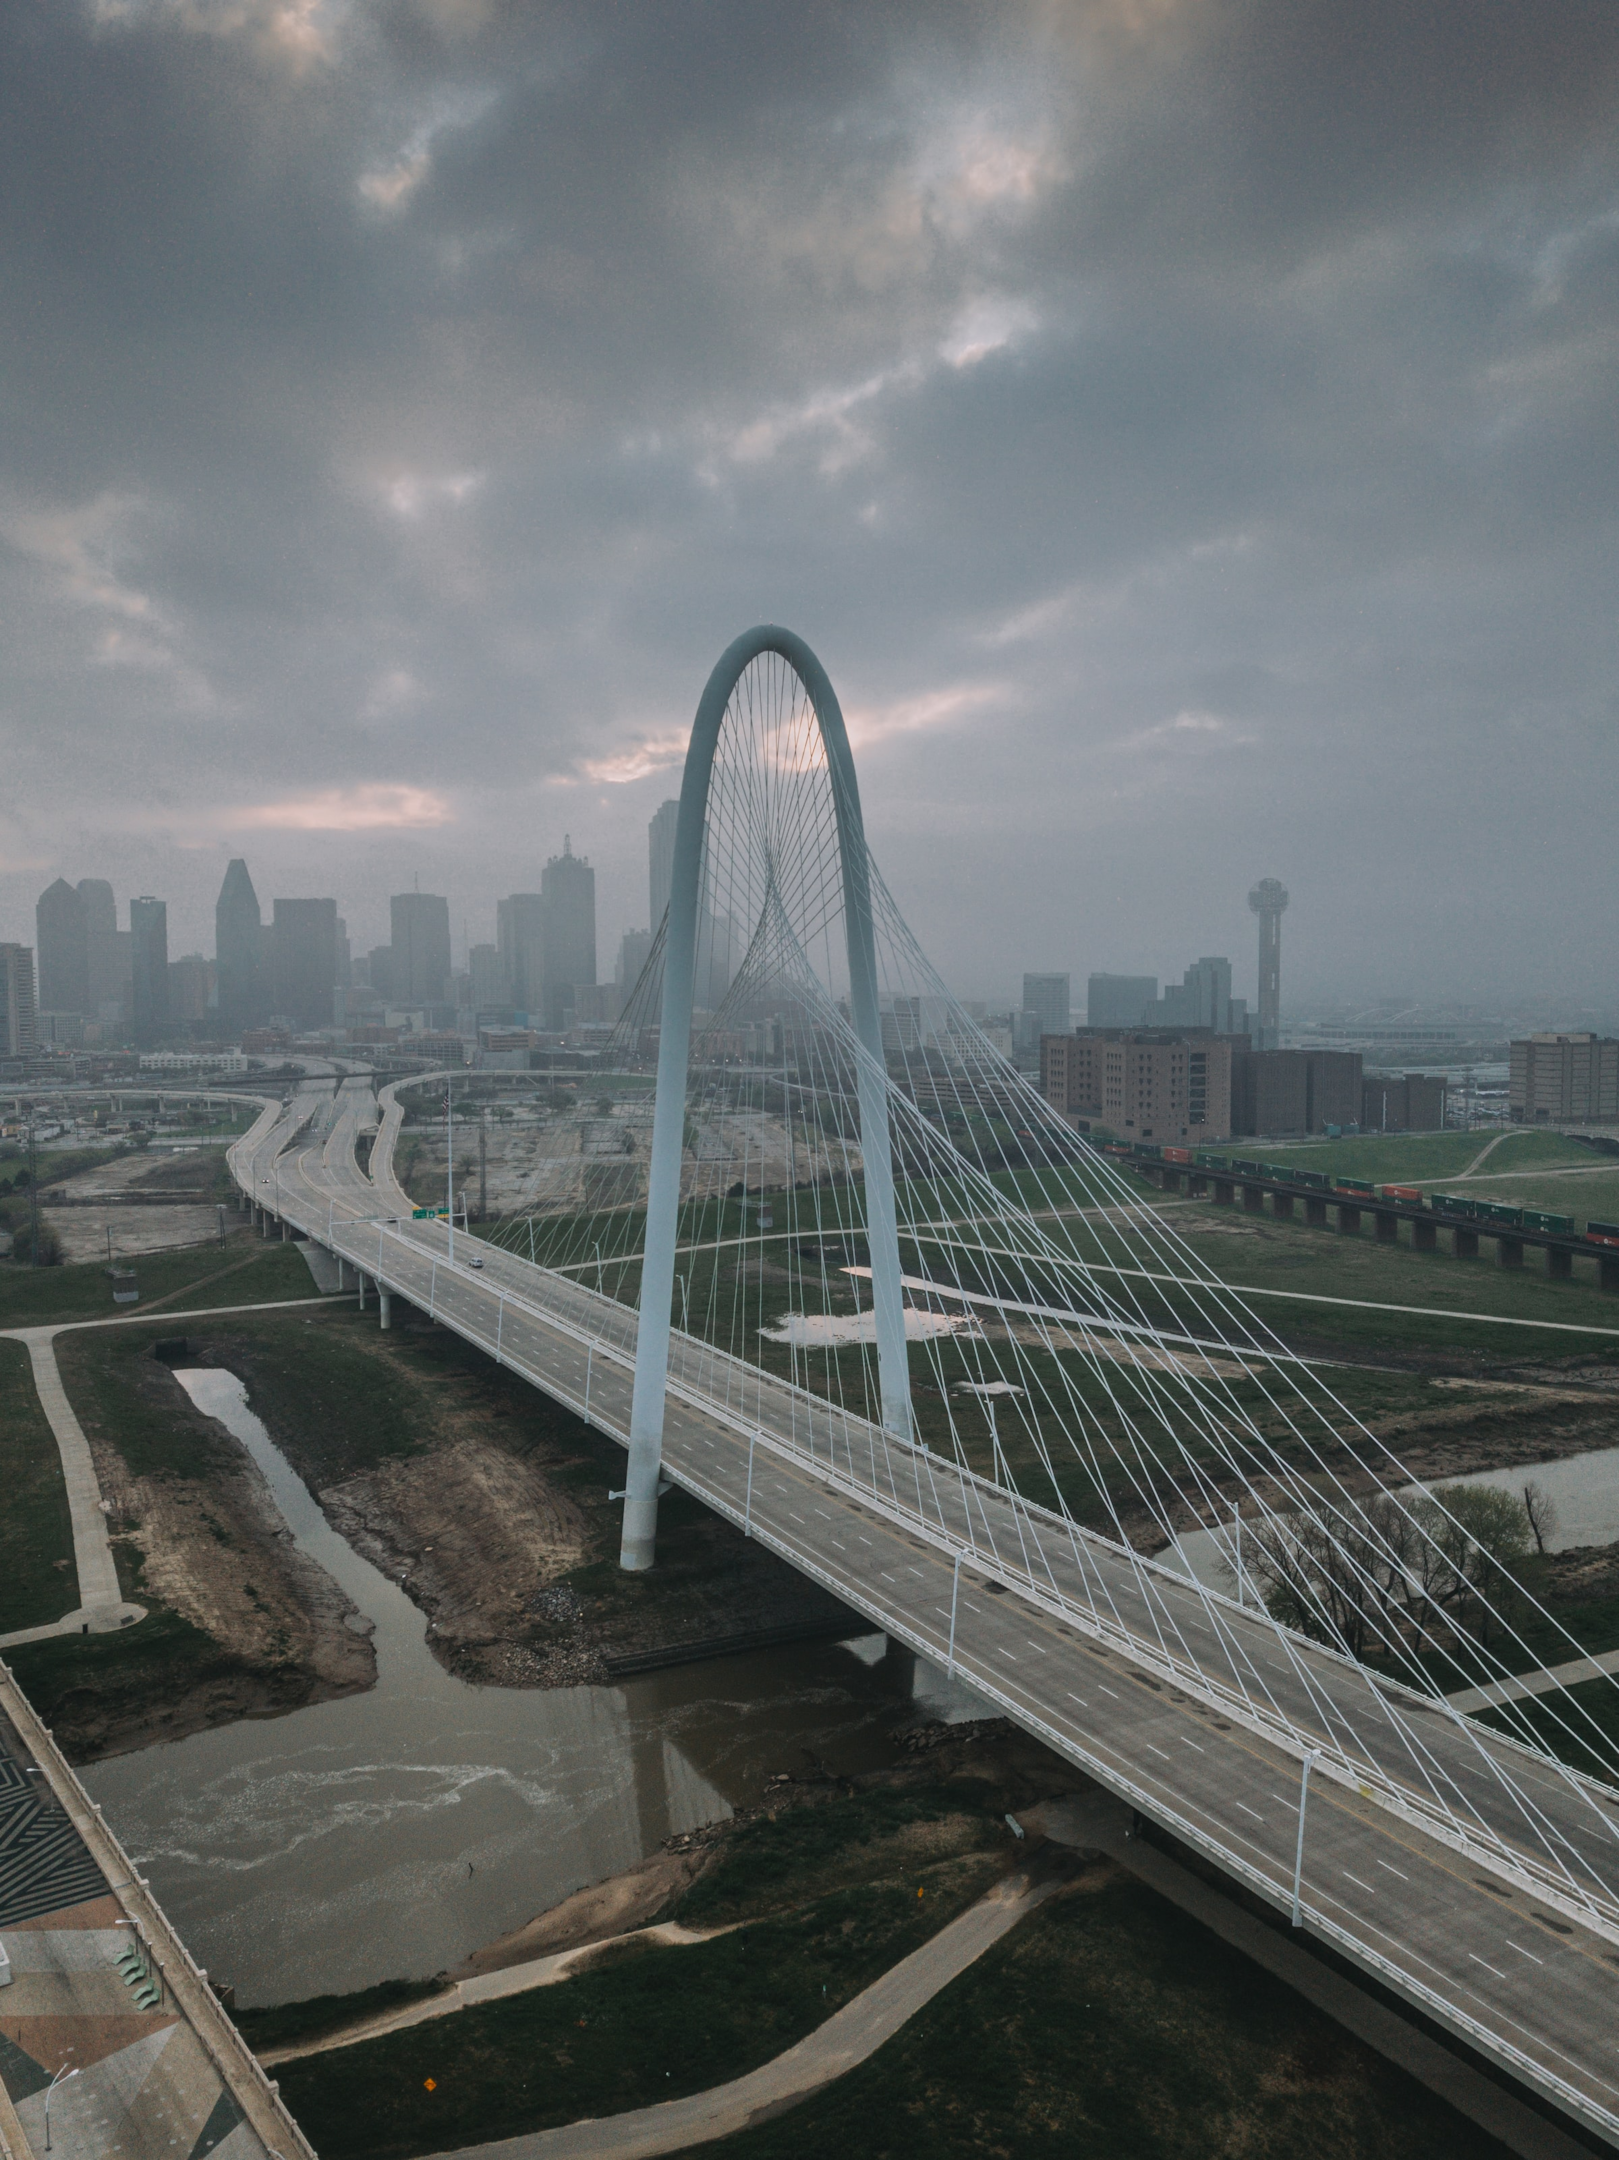 A contemporary, urban lifestyle is part of Dallas' individual branding.